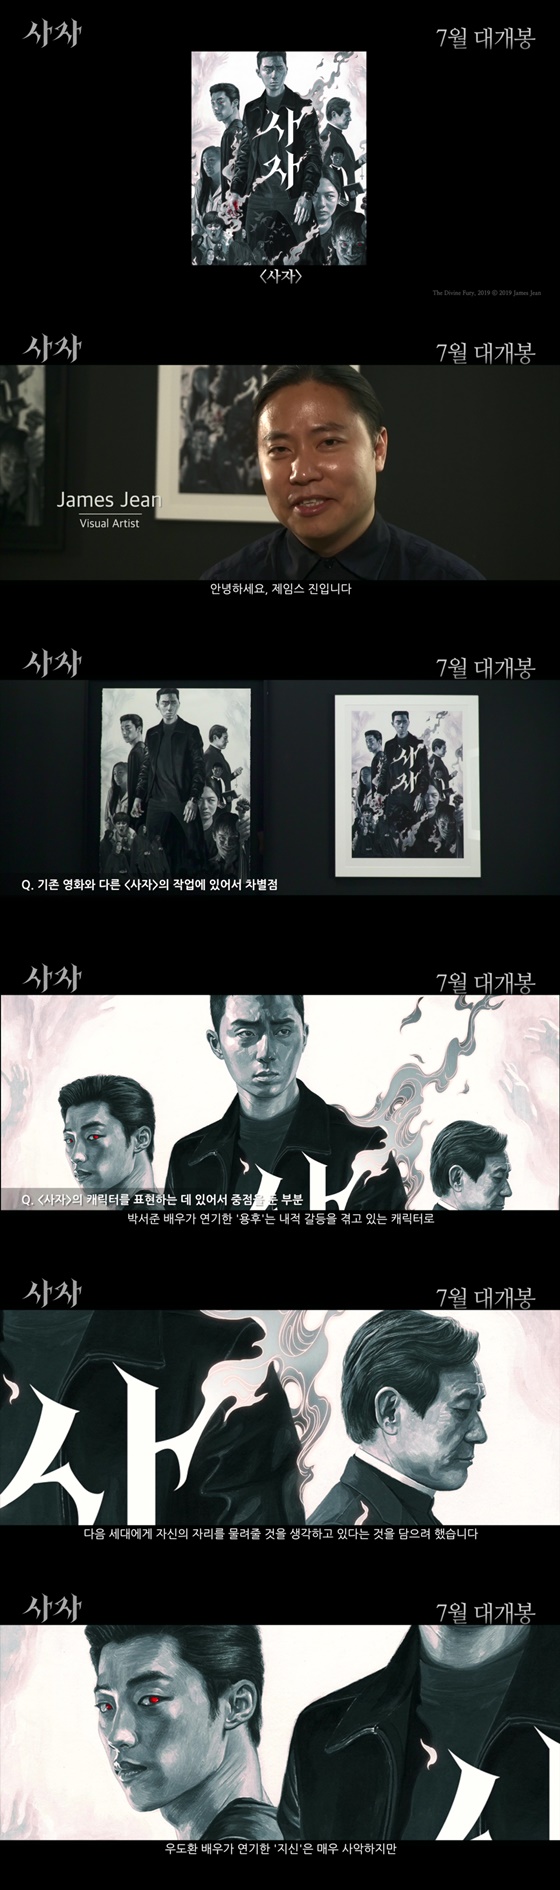 On the 12th, Lion released an interview video of James Jean with collaboration.The Lion is a story in which the martial arts champion Yonghu (Park Seo-jun) meets the Kuma priest Anshinbu (An Sung-ki) and confronts the powerful evil (), which has confused the world.James Jean is a consecutive winner of the Icener Awards, which is called the Academy Award of the Comics, from 2004 to 2008, and from 2005 to 2007 as the best cover writer of the Harvey Awards.The released video contains a variety of works by James Jean, who is active in various fields from Hollywood movies to DC comics covers.James Jean collaborated with The Lion for the first time in a Korean film; he said, I thought it was a good opportunity to meet Korean audiences through The Lion.The Lion contains a variety of characters, with more emphasis on describing one character and one person, and wanted to express the feelings and characteristics of all characters a little more clearly, he added.James Jean draws attention by completing the intense characters in the movie with unique expressive power.The lion is a very unique movie that I have never experienced before, with a variety of genres.James Jean and the Lion collaboration work can be found at James Jeans first large-scale exhibition James Jean, endless journey held at Lotte Museum until September 1.Meanwhile, Lion will be released on the 31st.